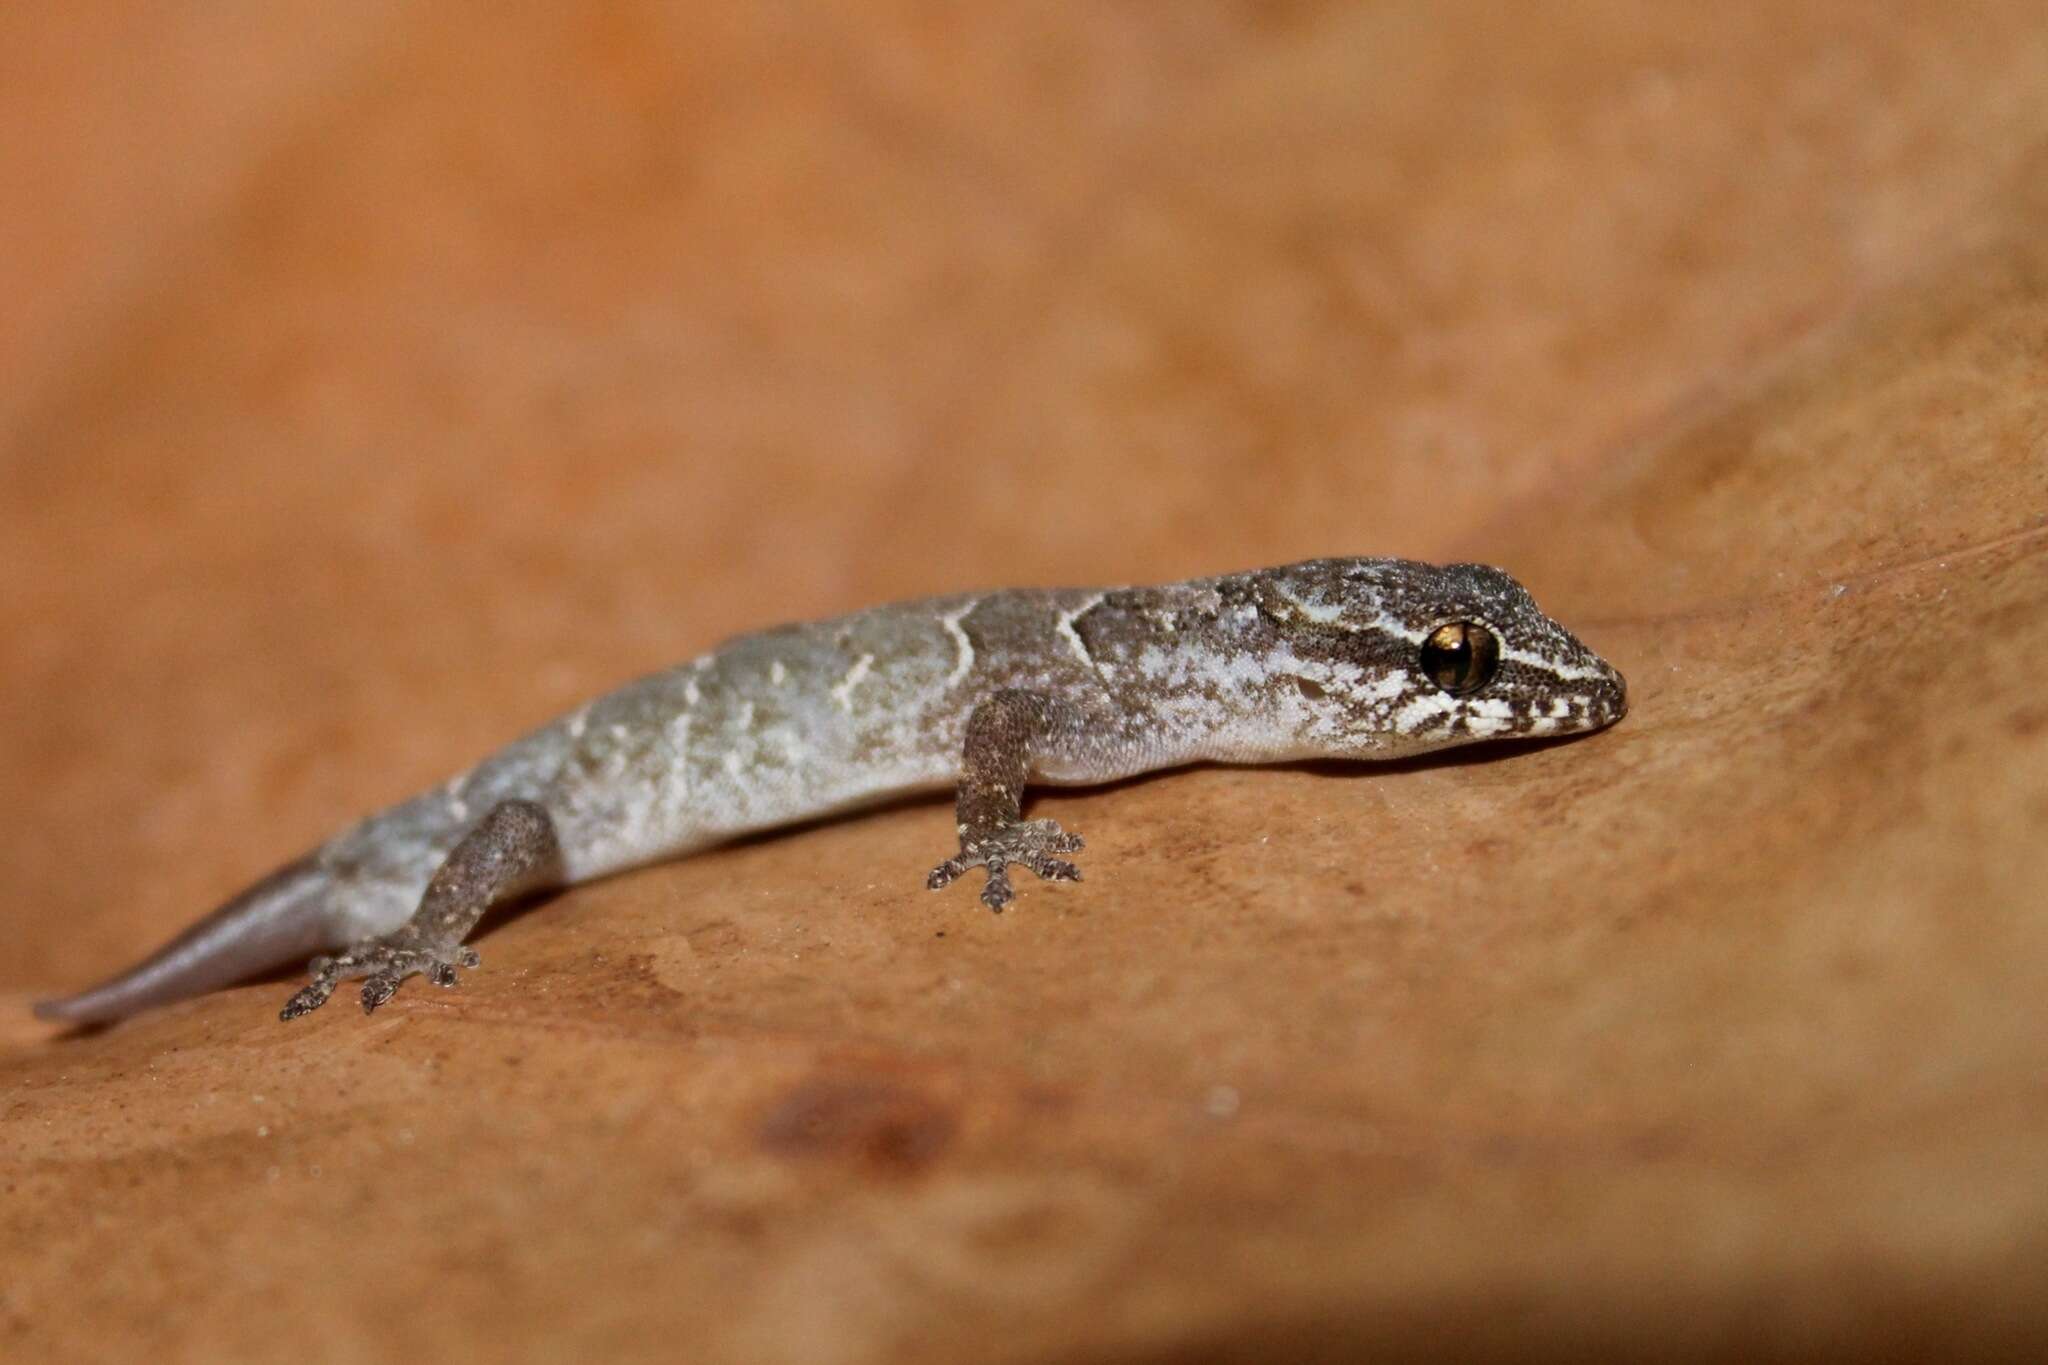 Image of Striped Caribbean Gecko